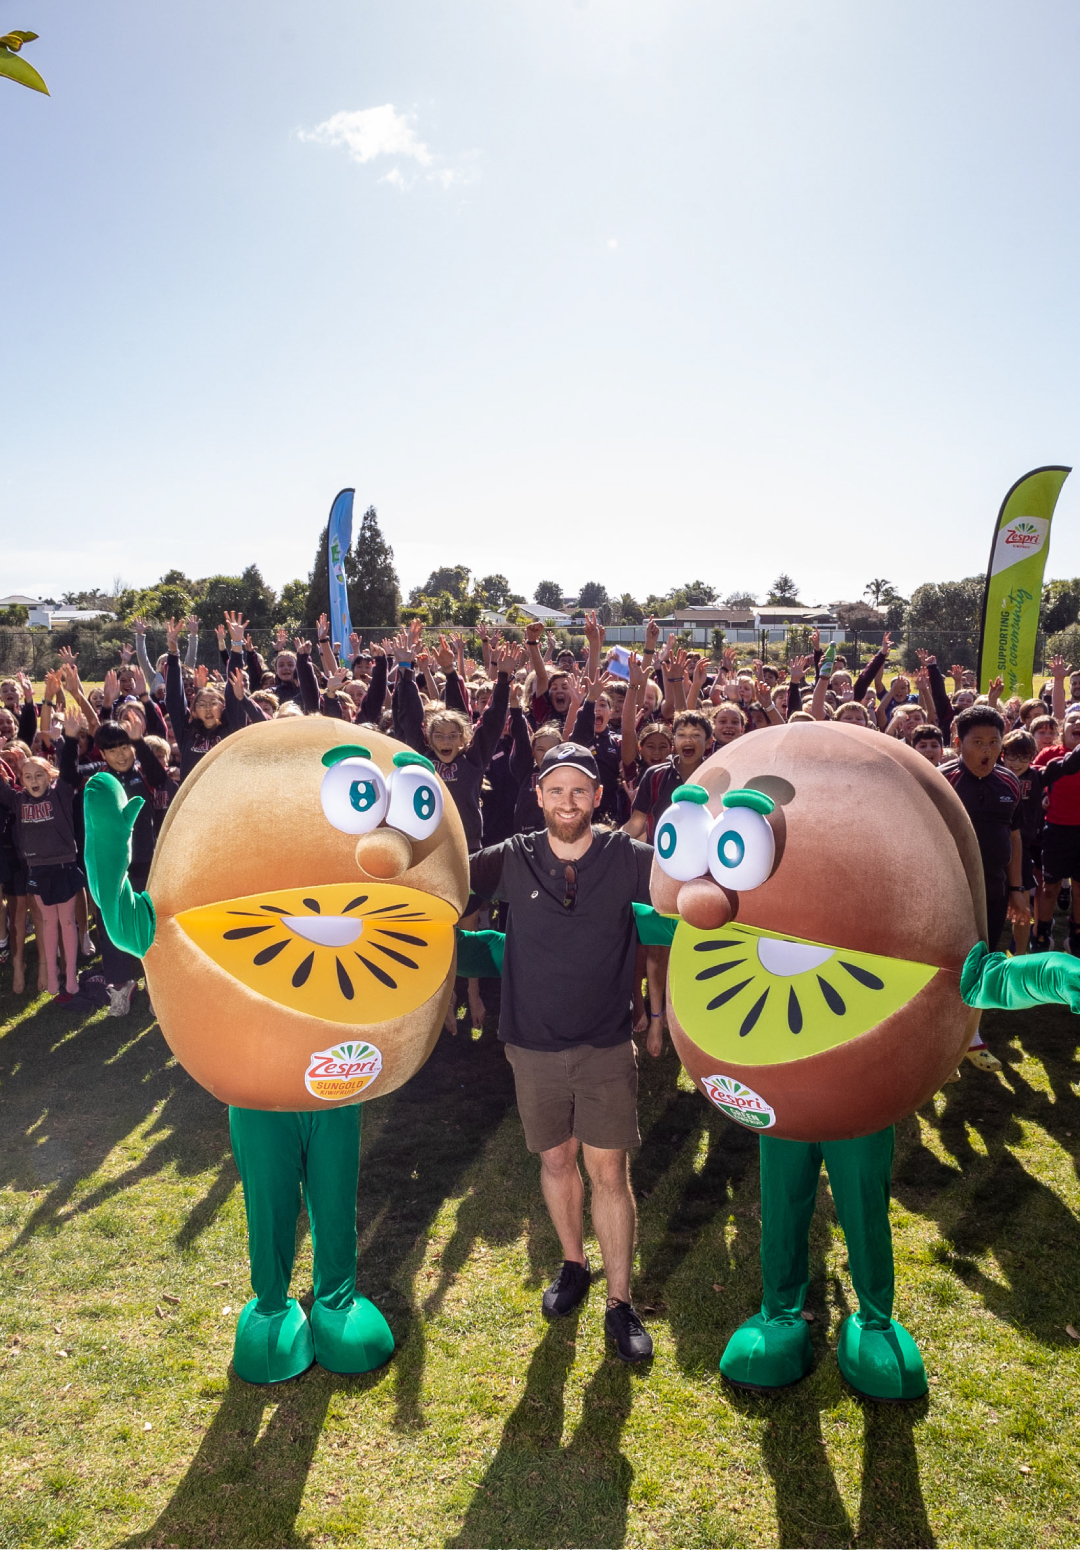 Zespri Young and Healthy Virtual Adventure Group photo